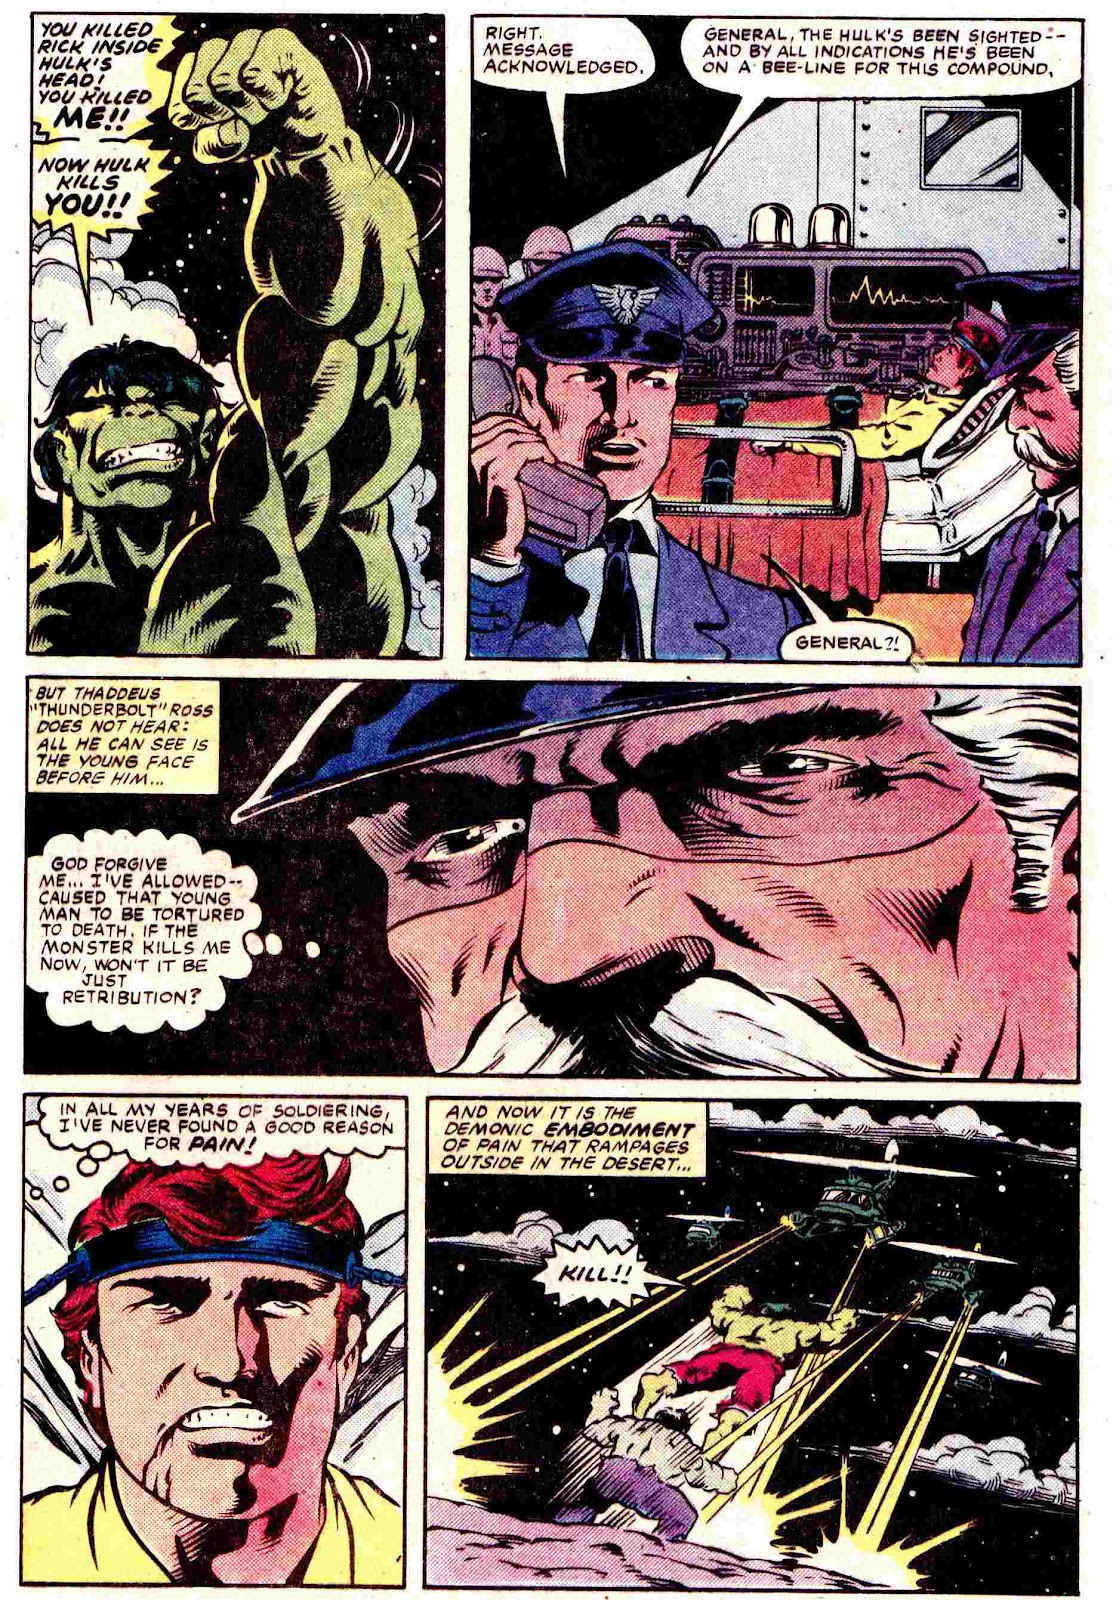 What If? (1977) issue 45 - The Hulk went Berserk - Page 20